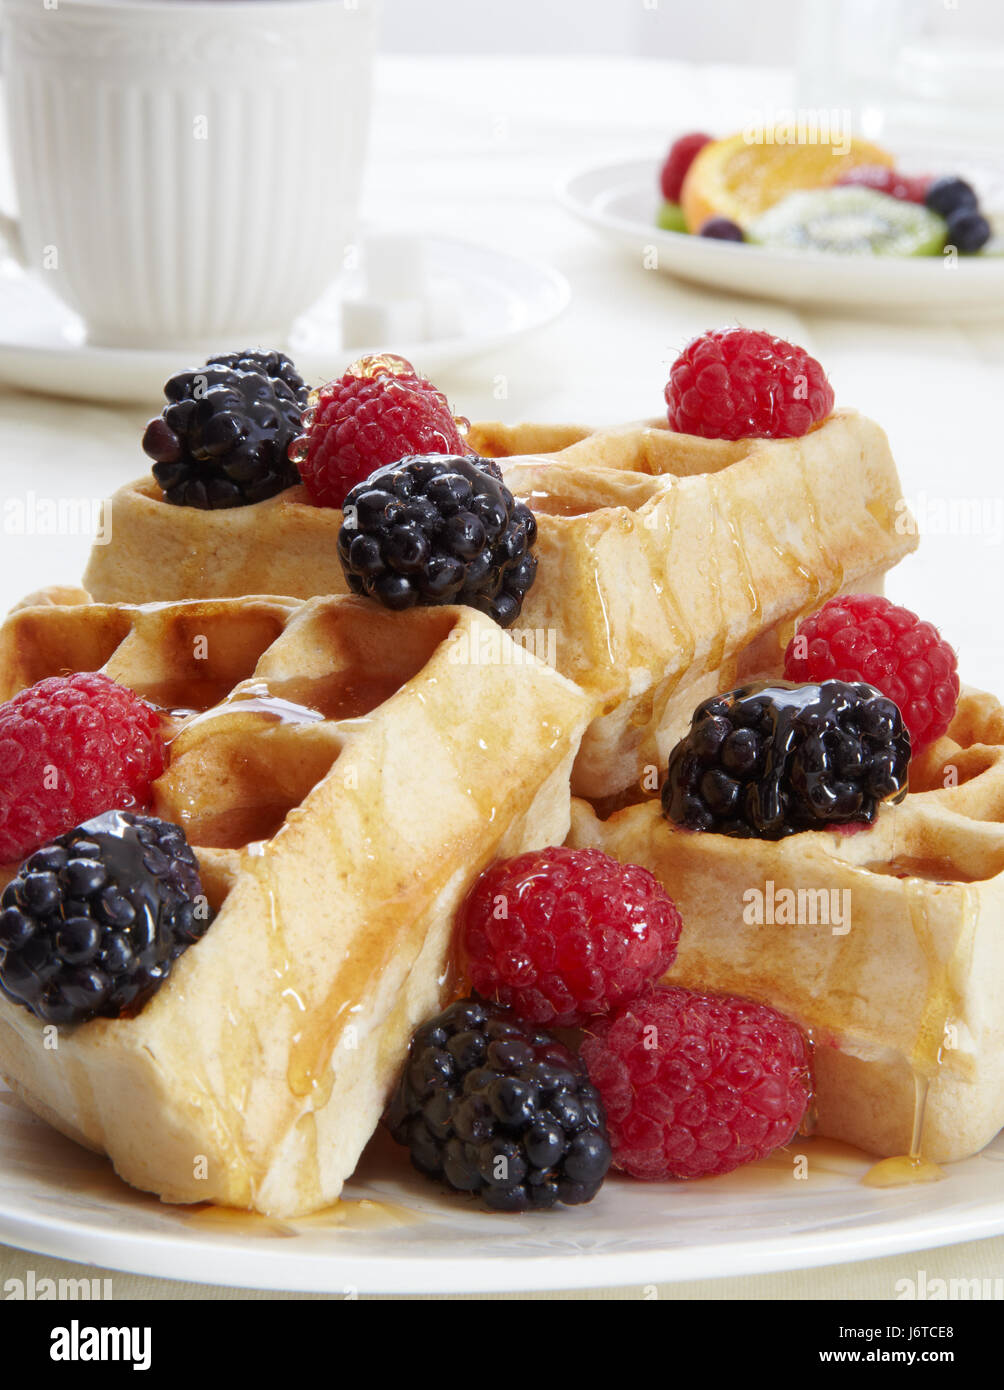 waffles and berries Stock Photo